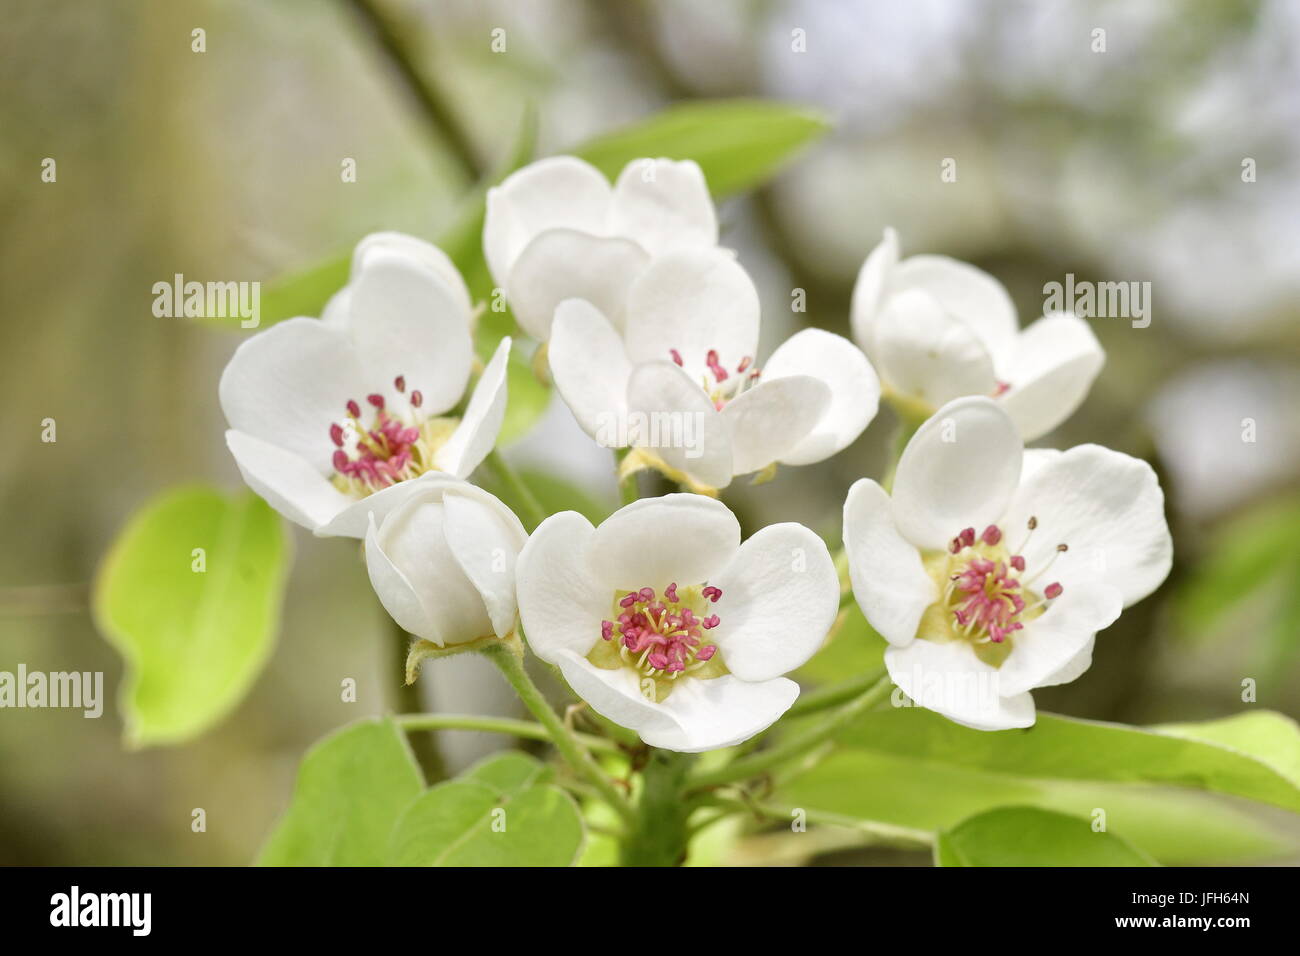 Pear blossoms Stock Photo